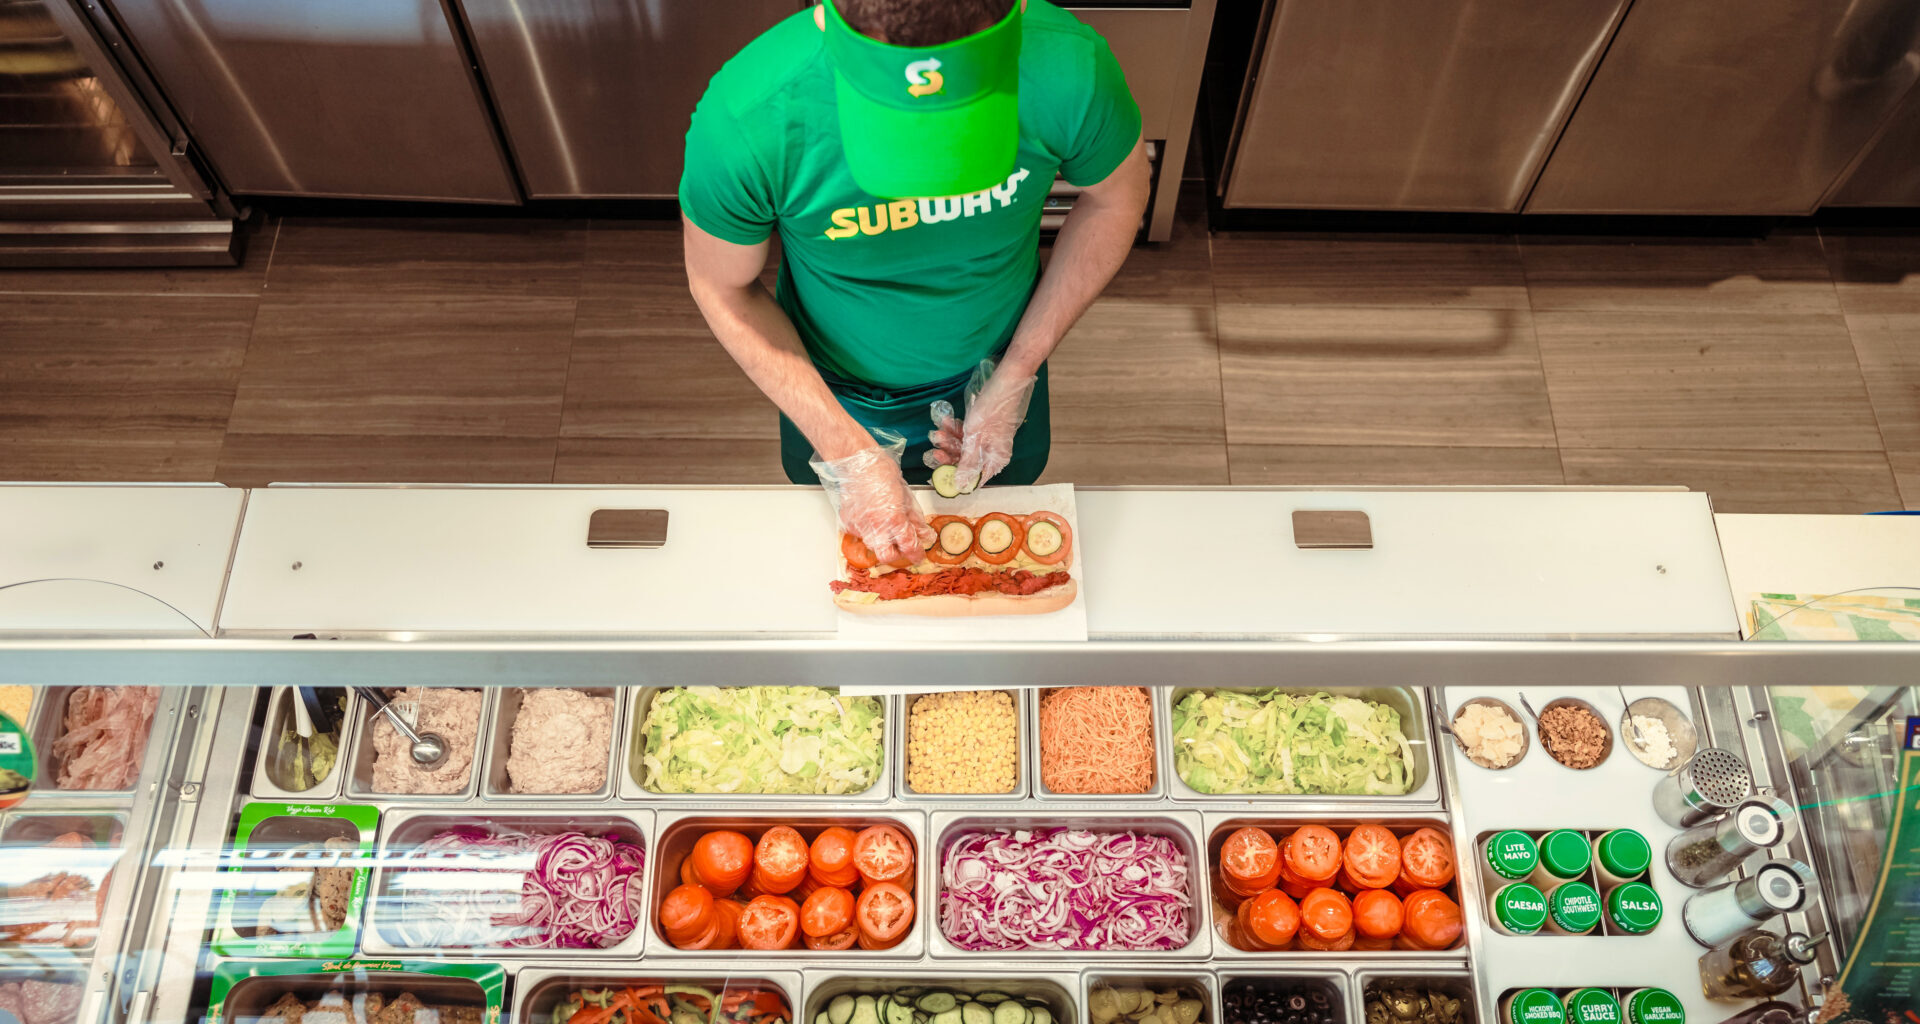 The Subway Logo & Brand: Success Sandwiched With Greatness